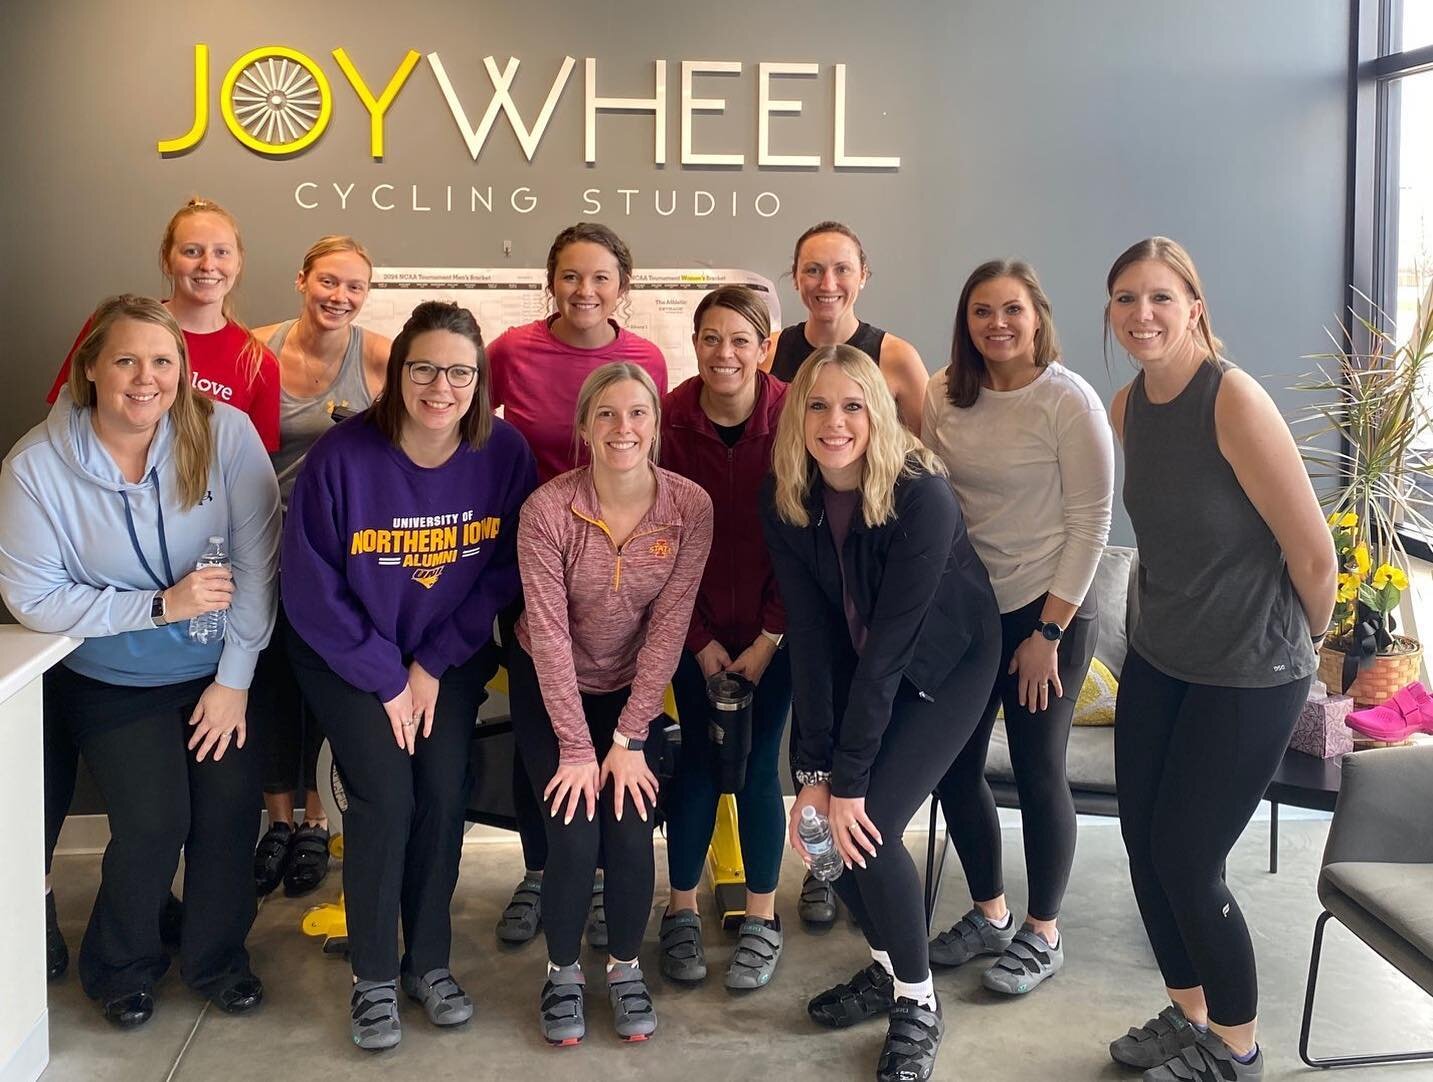 We had the honor of hosting VGM's Women in Leadership group for a private ride last week and oh mama they were a fun bunch! After the ride our owner Jess shared her story about her path to creating the studio plus her tips &amp; tricks on integrating